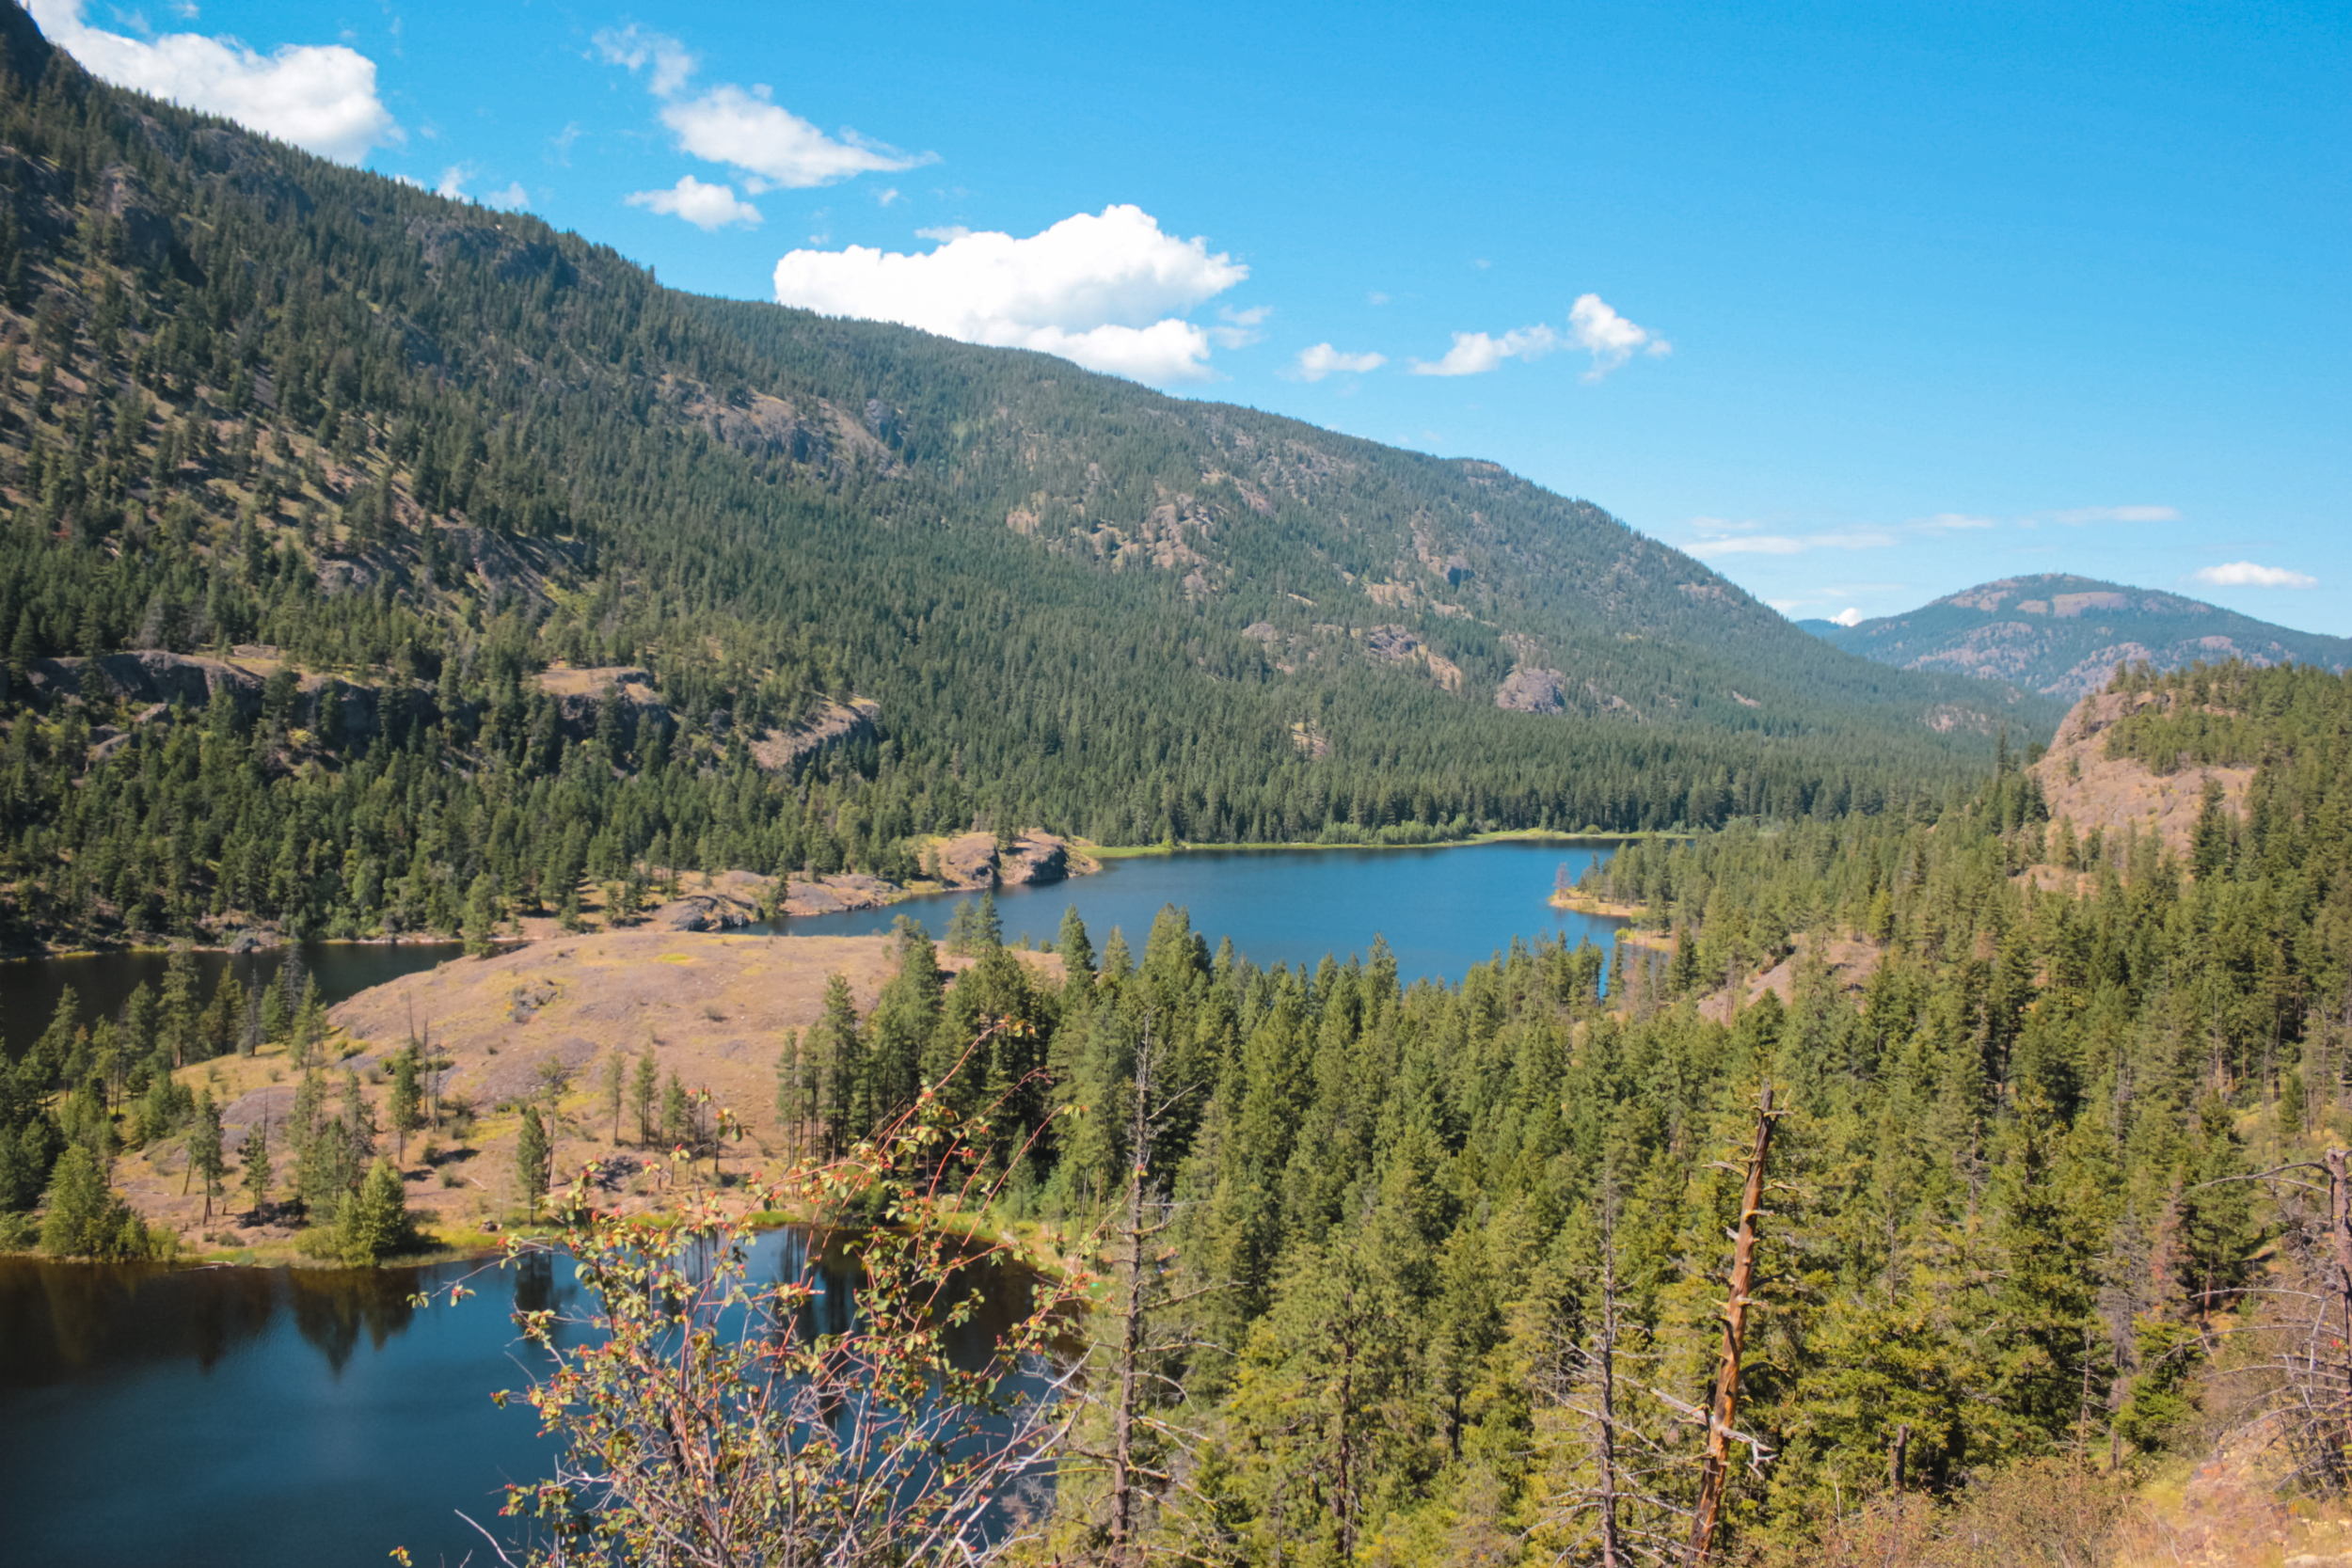 View of Rose Valley Reservoir. Blue water surrounded by a forest.